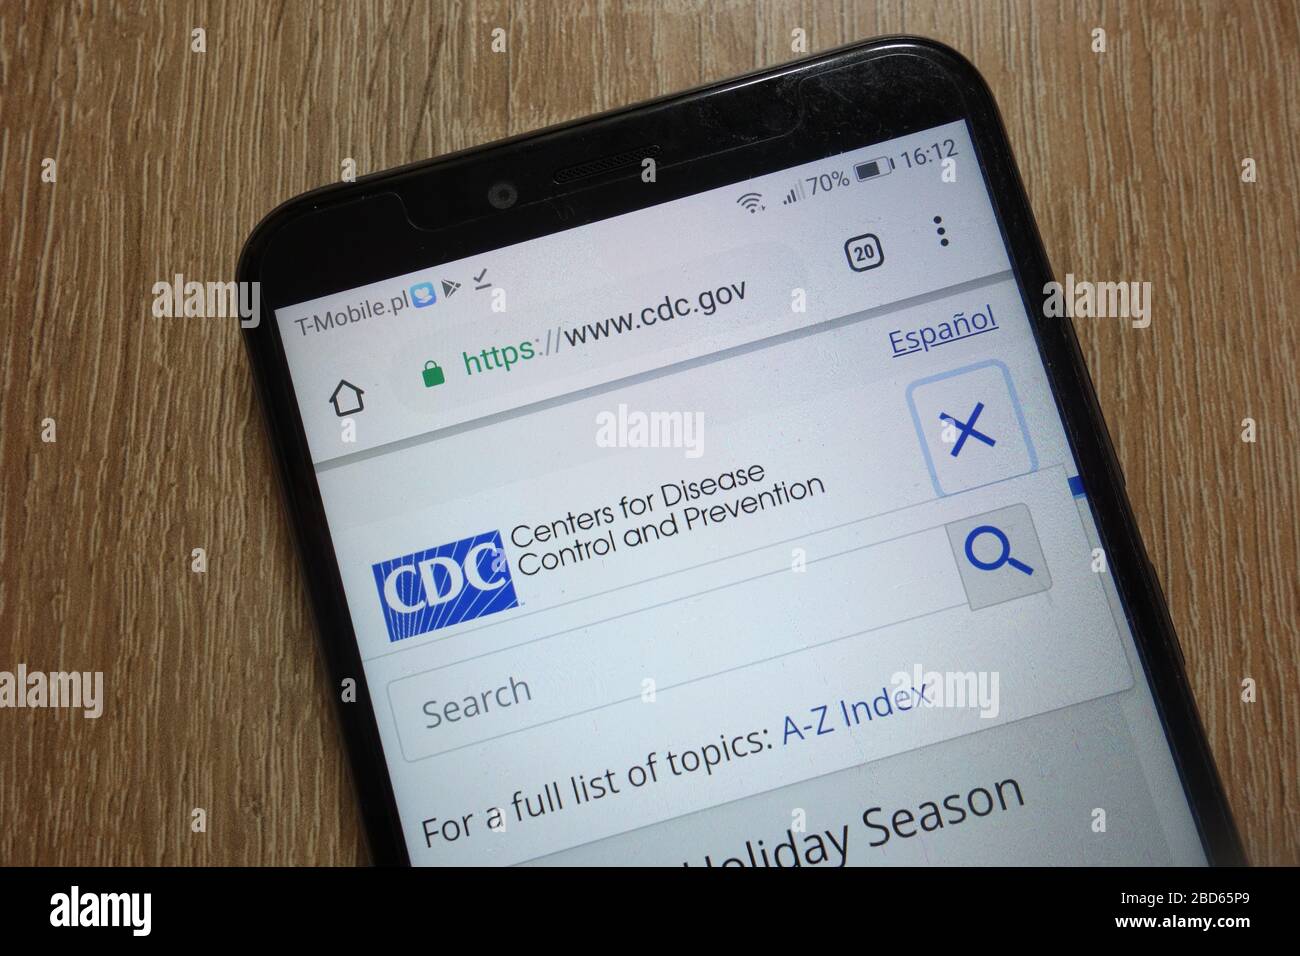 Centers for Disease Control and Prevention (CDC) website displayed on smartphone Stock Photo